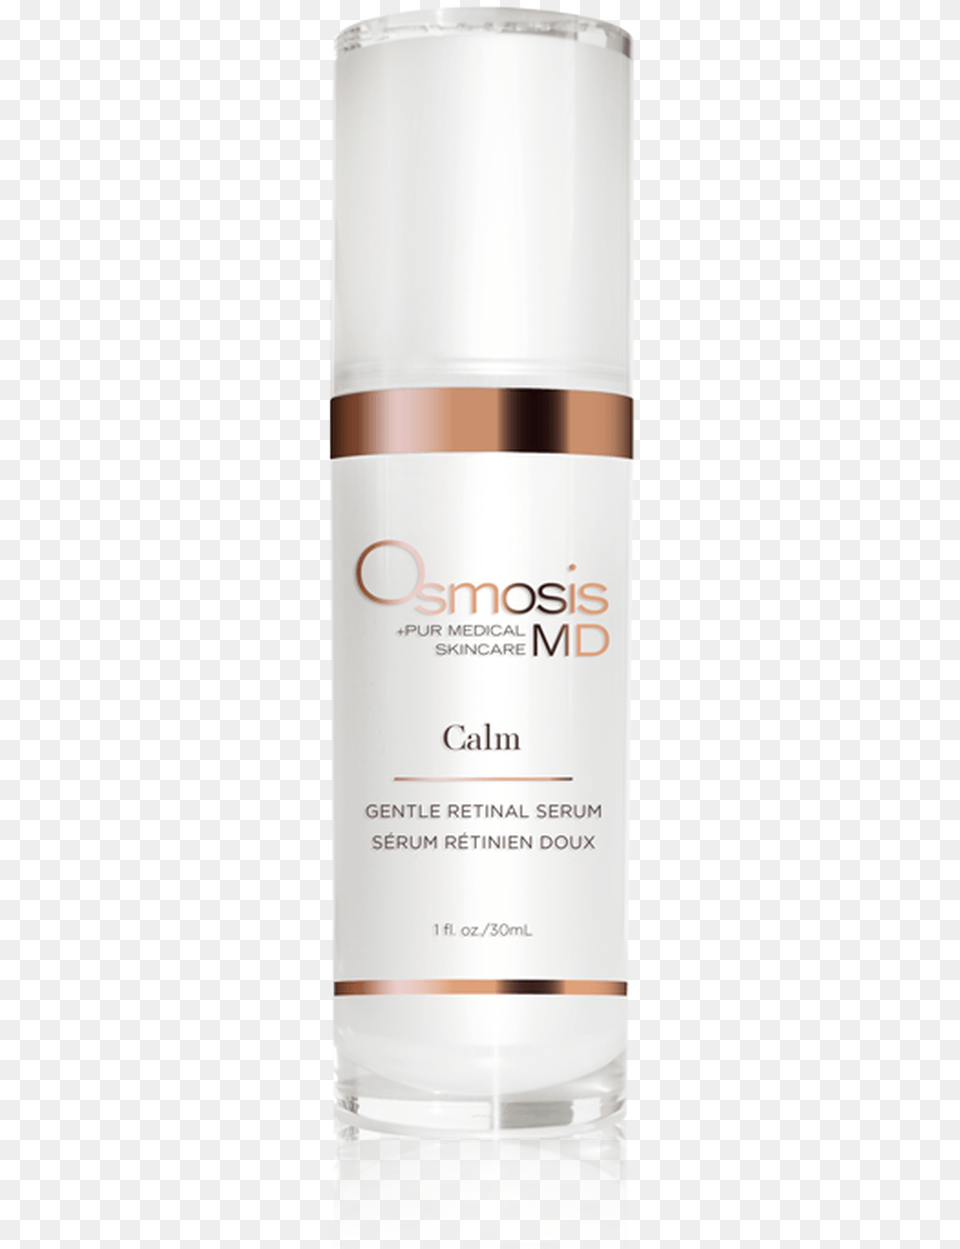 Osmosis Skincare Md Calm Gentle Retinal Serum Osmosis Catalyst Ac, Cosmetics, Bottle Free Transparent Png